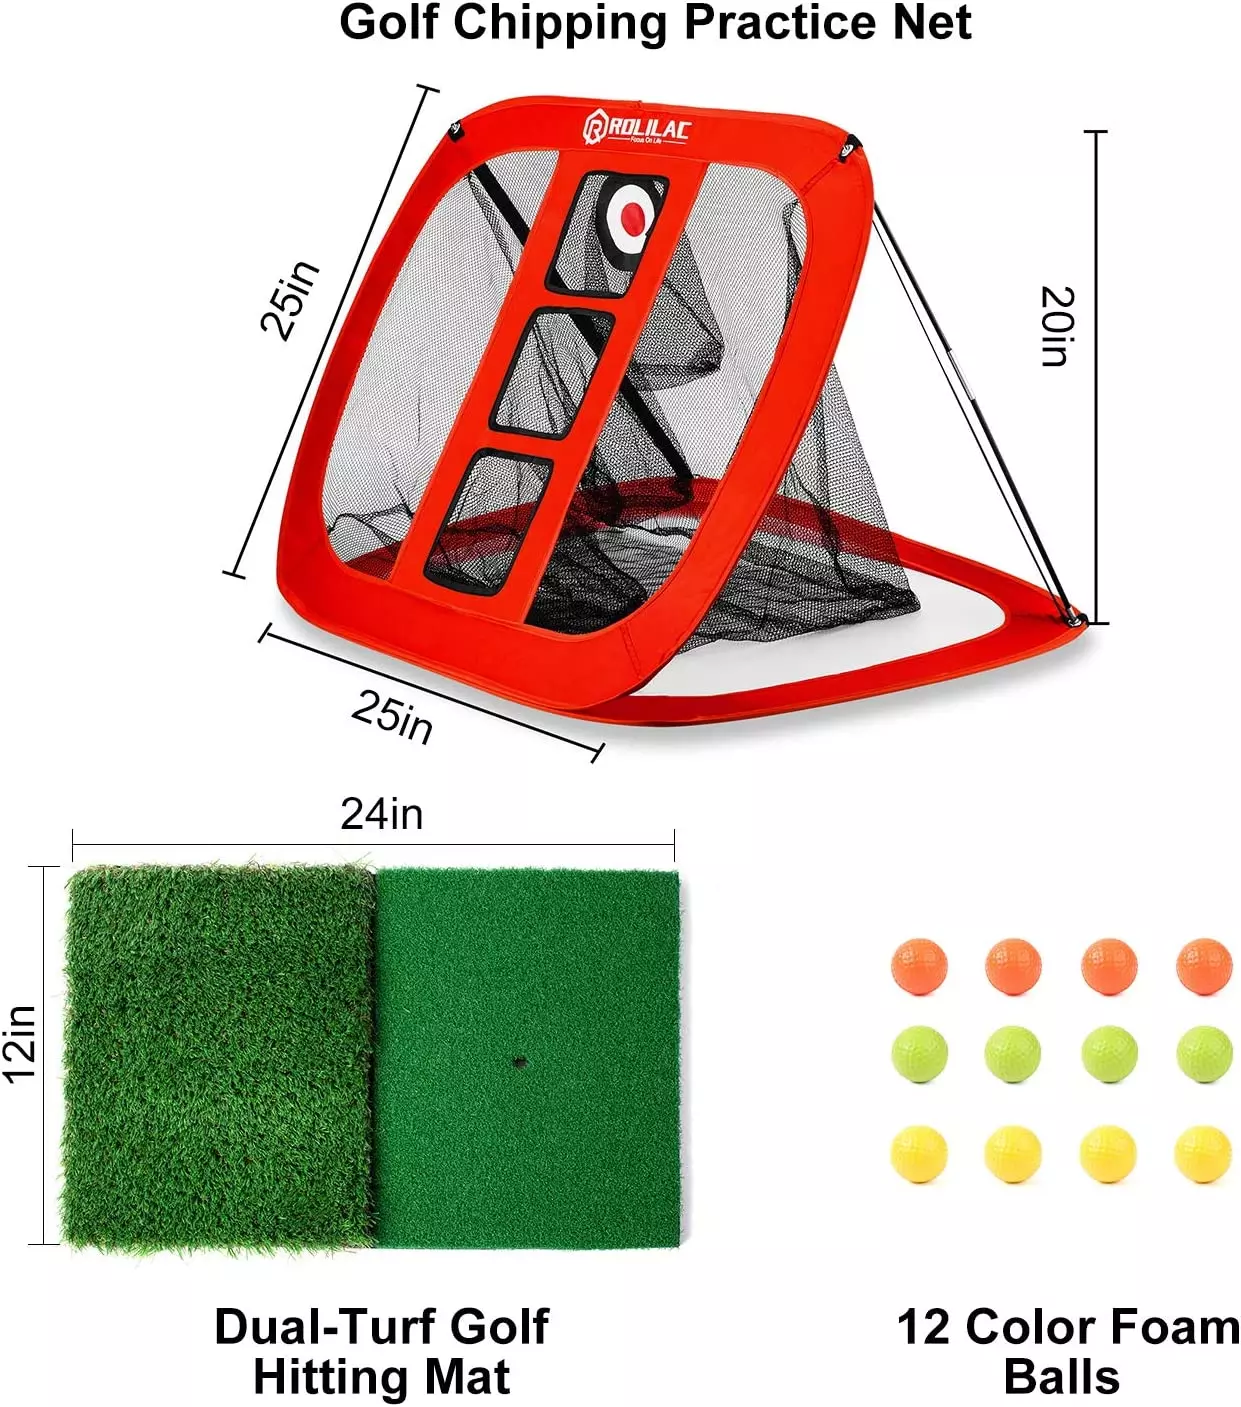 This golf chipping mat is quite the package. Includes multi-feel mats, foam balls, and a 25 inch net that can catch balls at various flights. Relilac Pop Up Golf net great for indoor or outdoor use